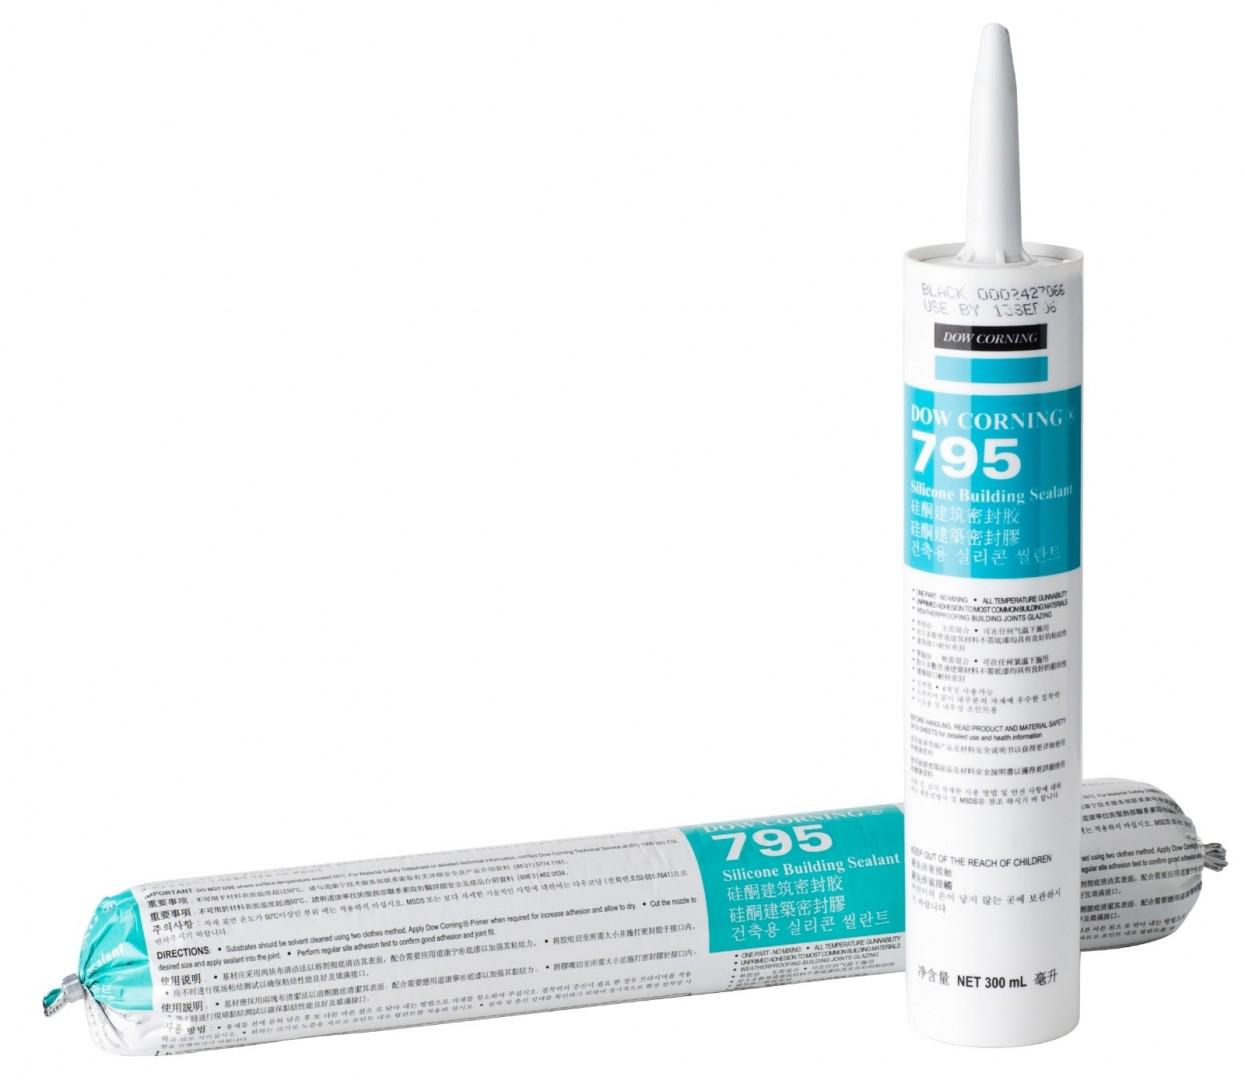 DOWSIL™ 795 Structural Glazing Sealant from Dowsil